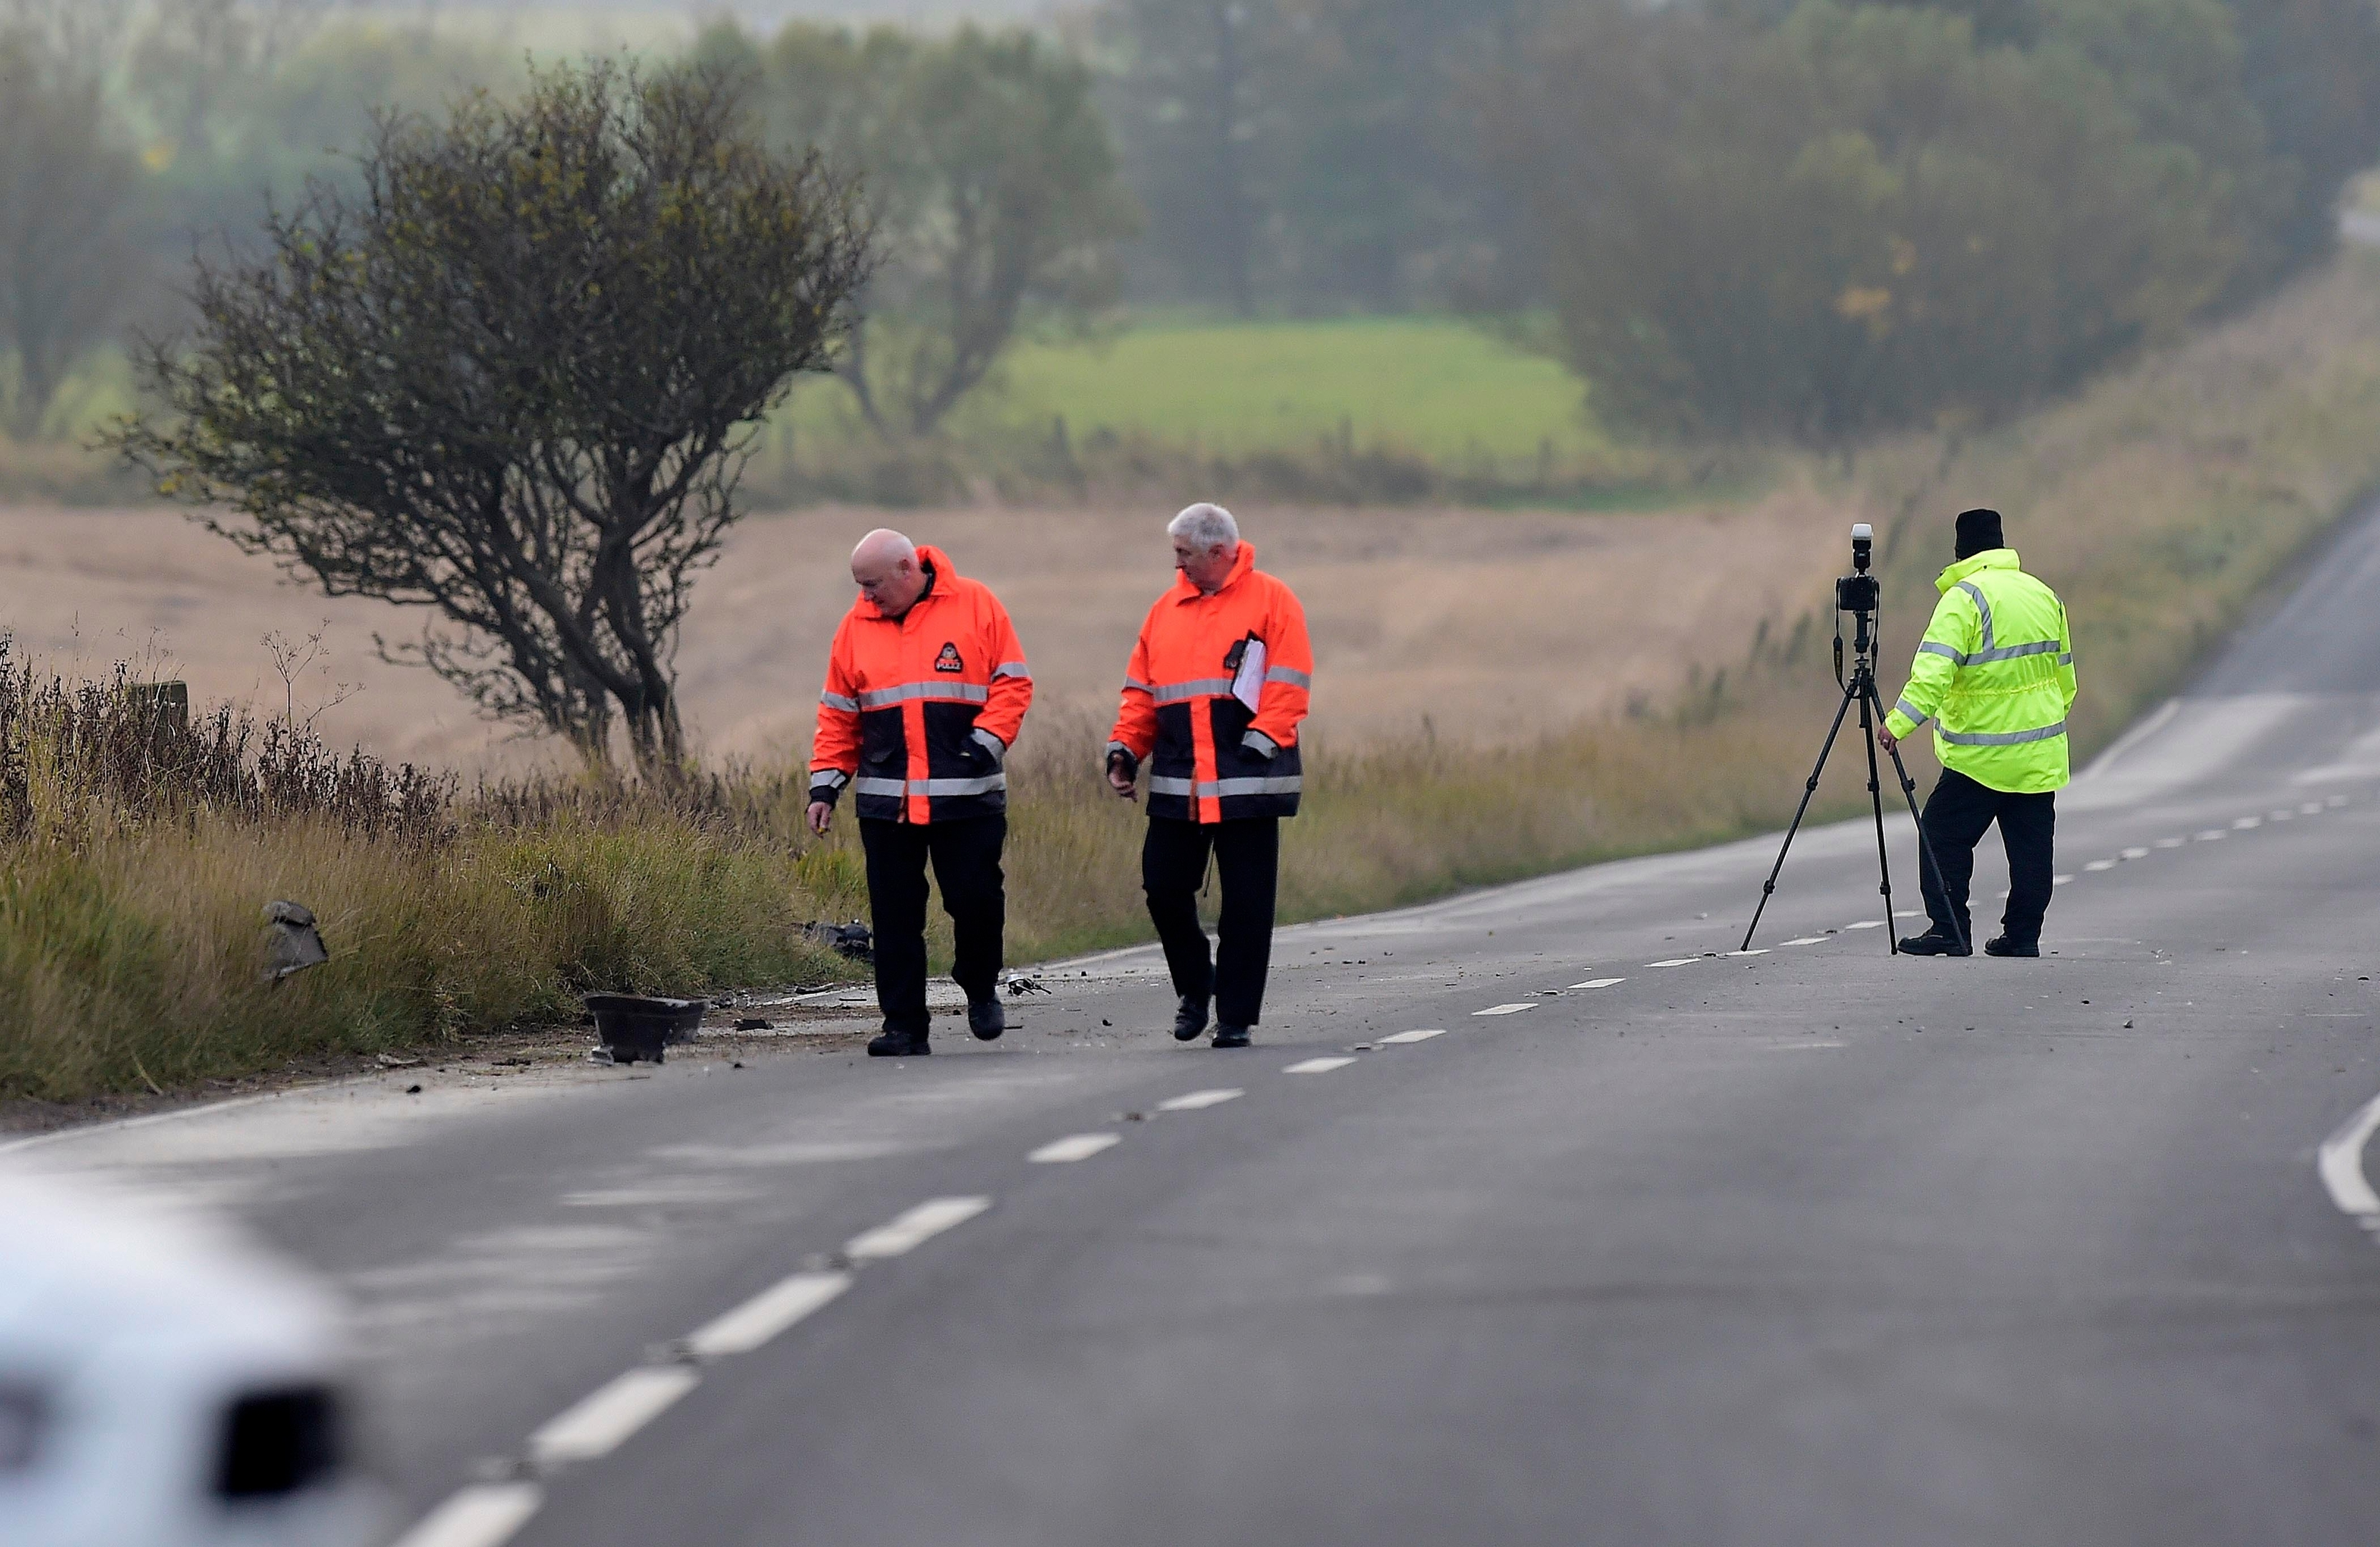 Accident investigators at the scene of the crash on the a952 near the fetterangus turn off where a motorbike and car collided.